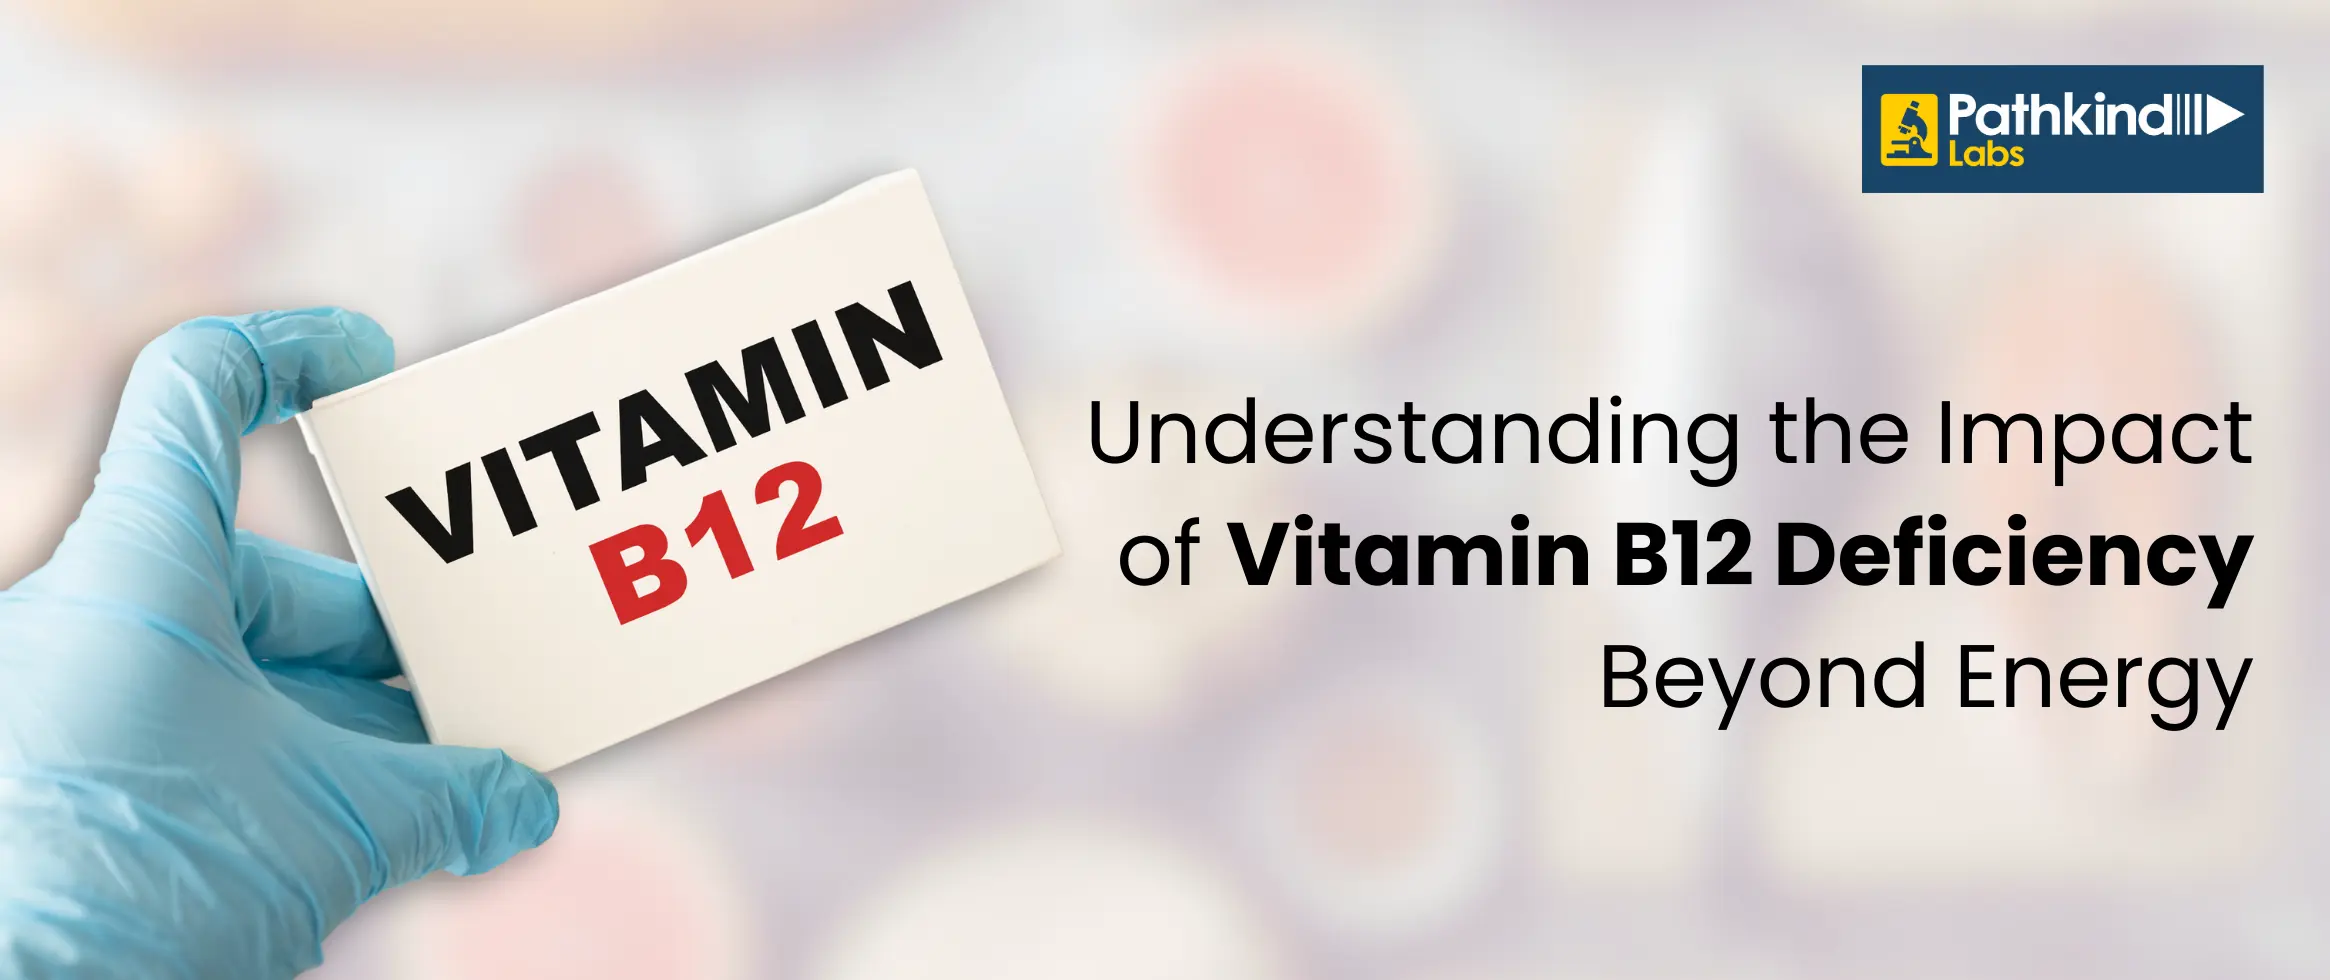  The Unexpected Ways Vitamin B12 Deficiency Impacts Your Health Beyond ...